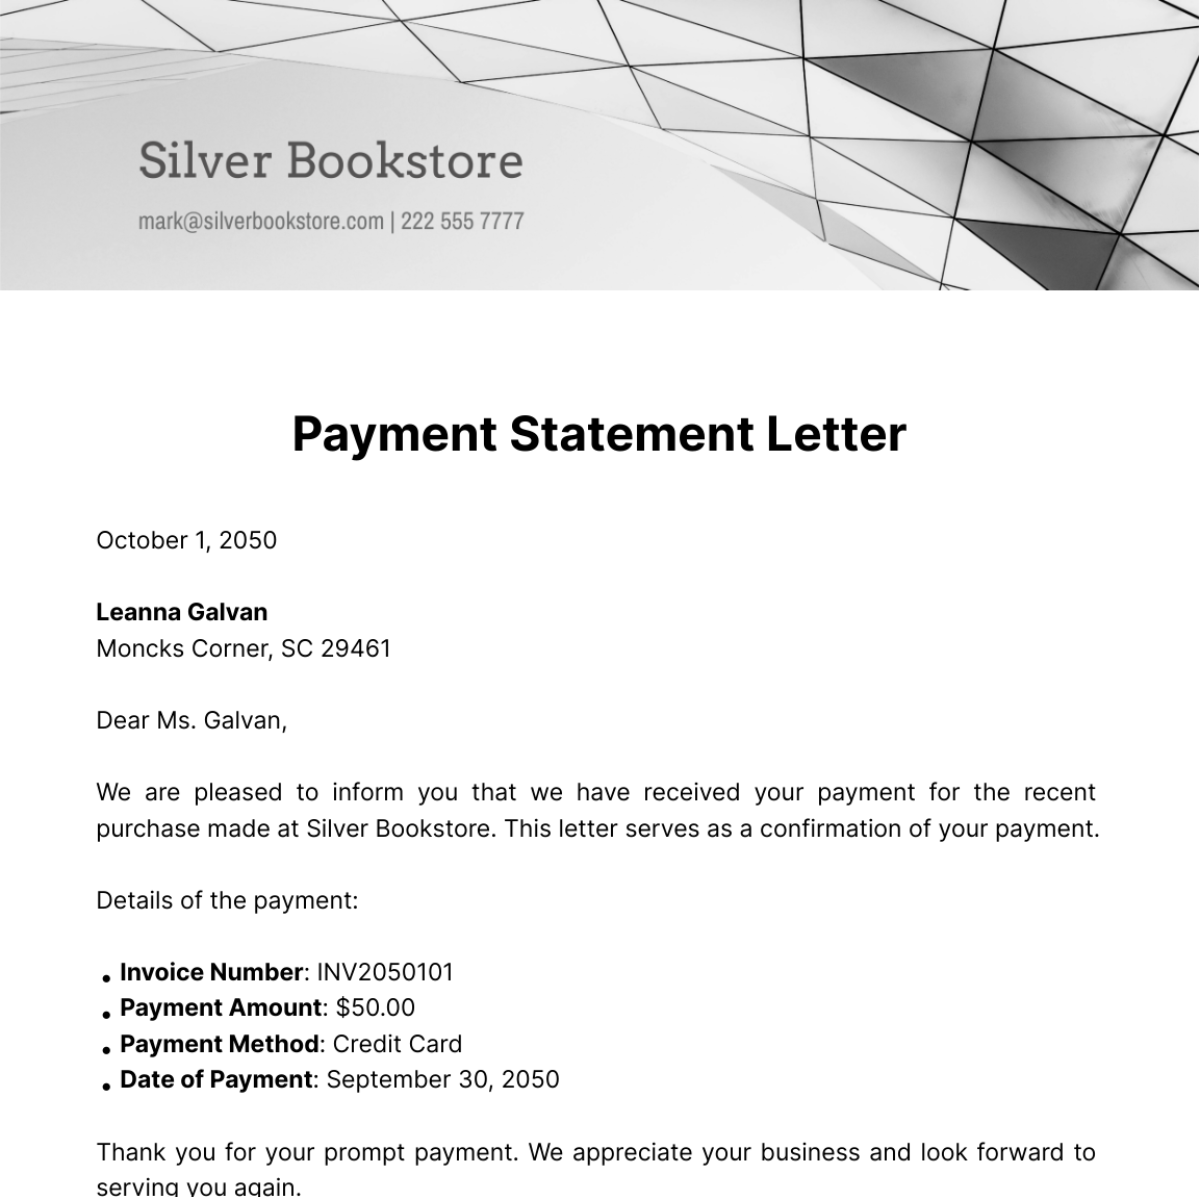 Payment Statement Letter Template